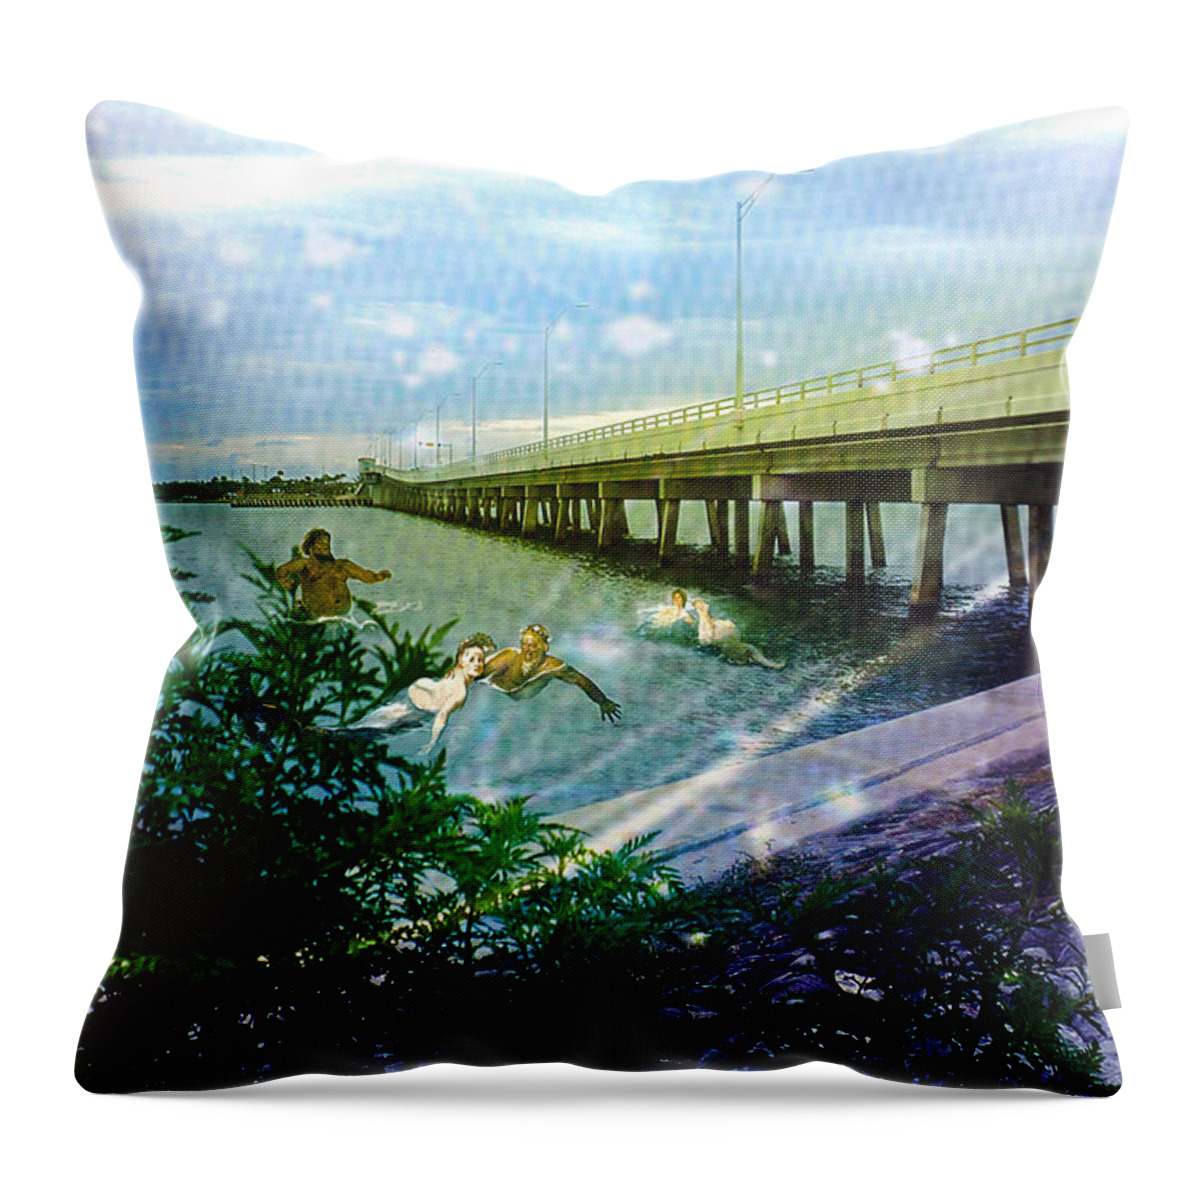 Boating Throw Pillow featuring the digital art Mermaids in Indian River by Megan Dirsa-DuBois